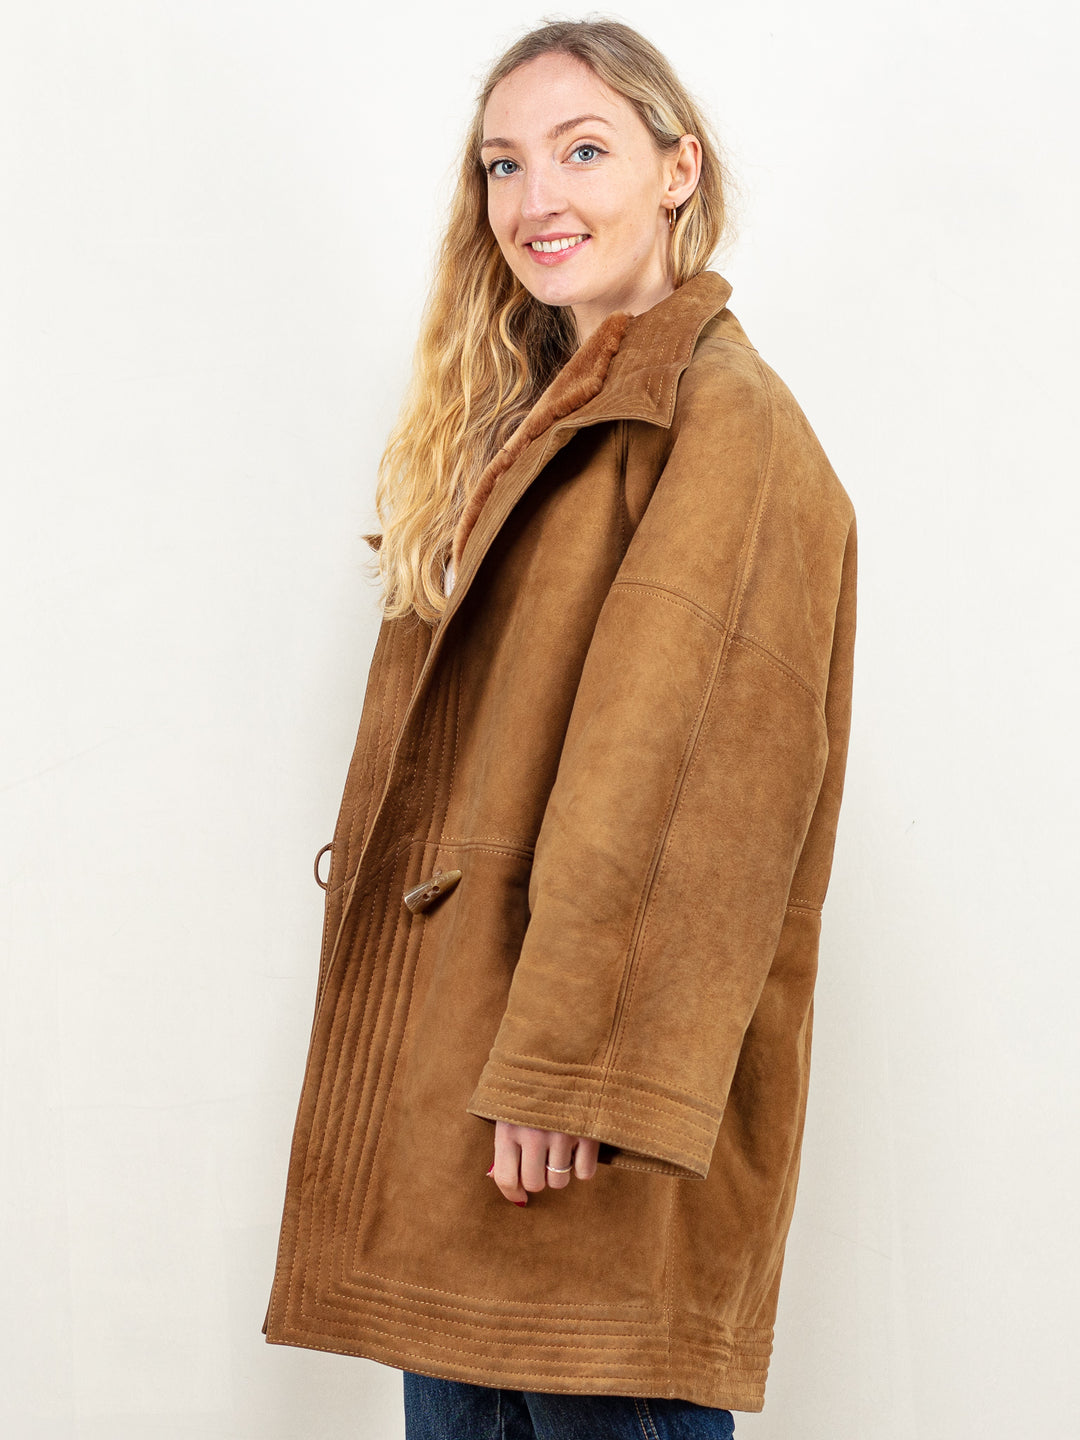 Shearling Coat Women vintage 80's brown oversized sheepskin flute sleeve sunny brown shearl overcoat sustainable fashion size extra large XL